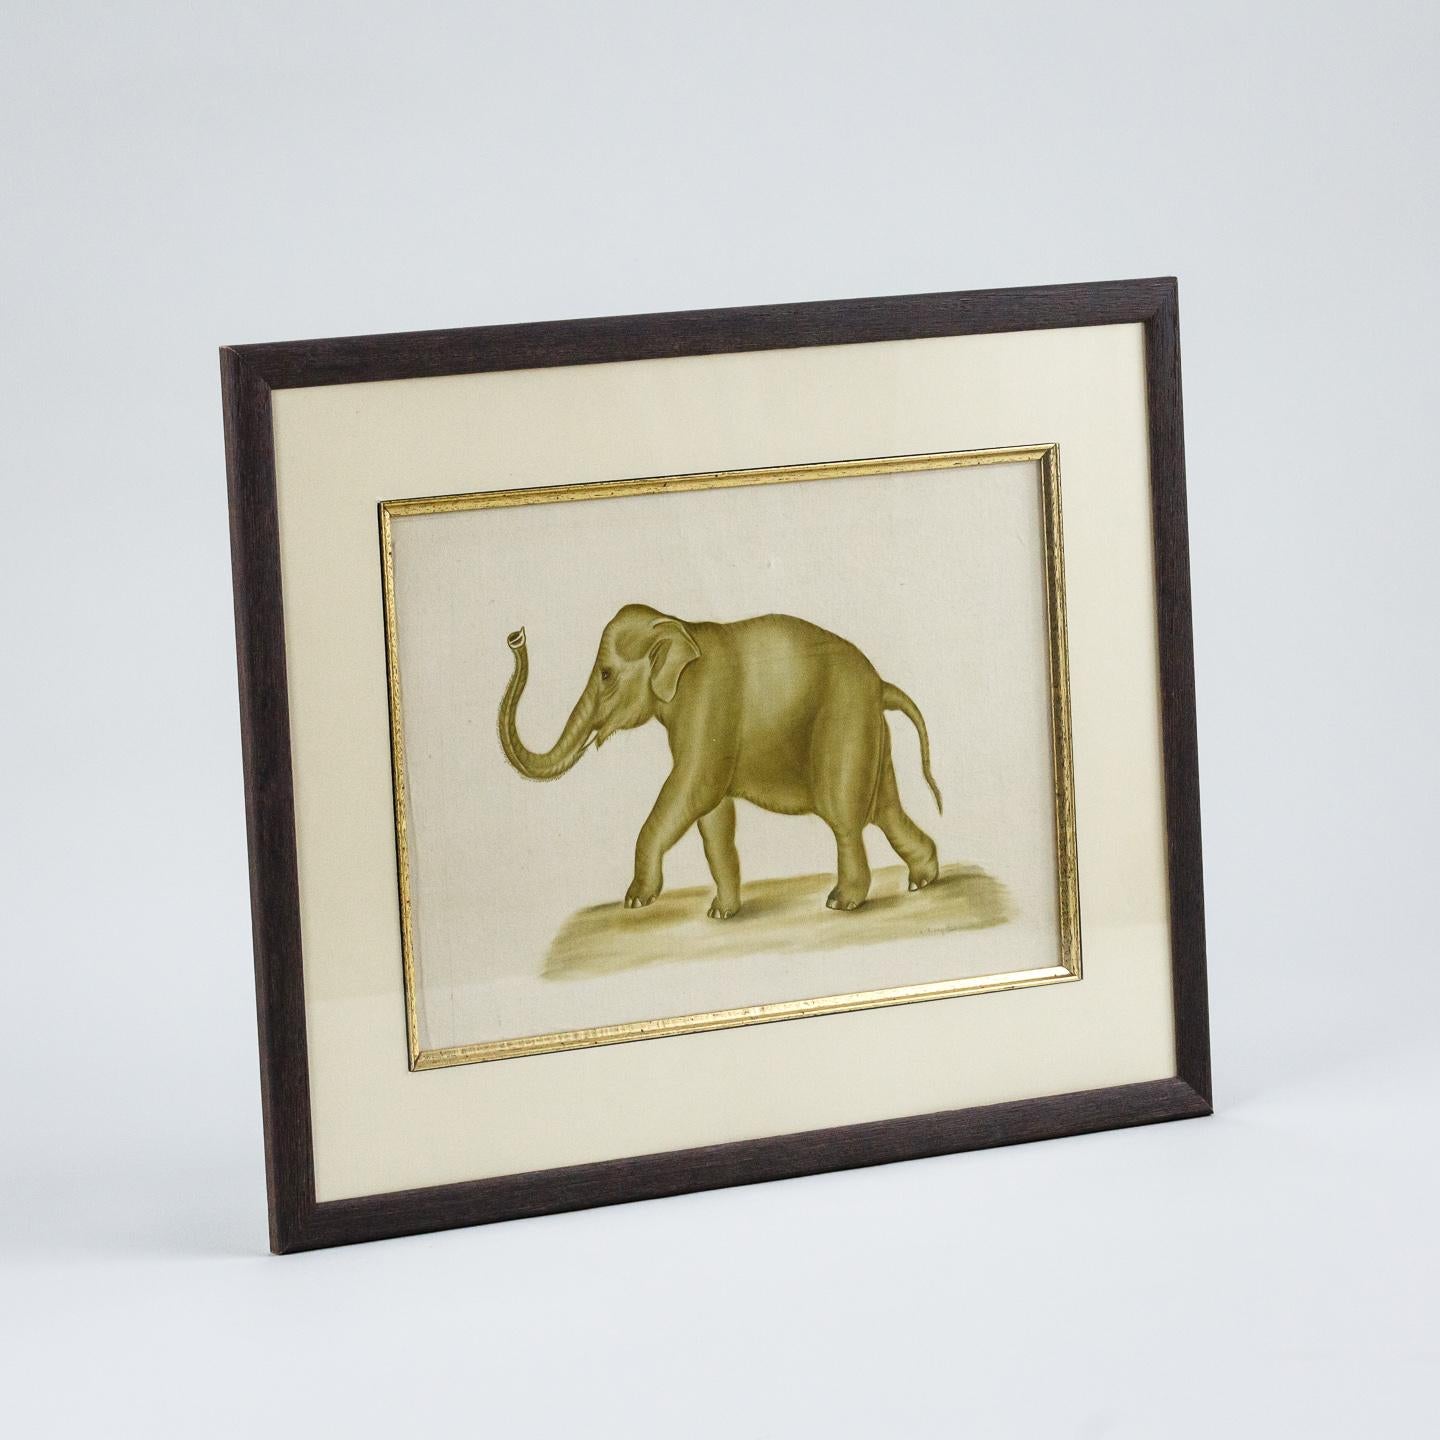 Original Watercolour of an Elephant by La Roche Laffitte In Good Condition For Sale In Pease pottage, West Sussex